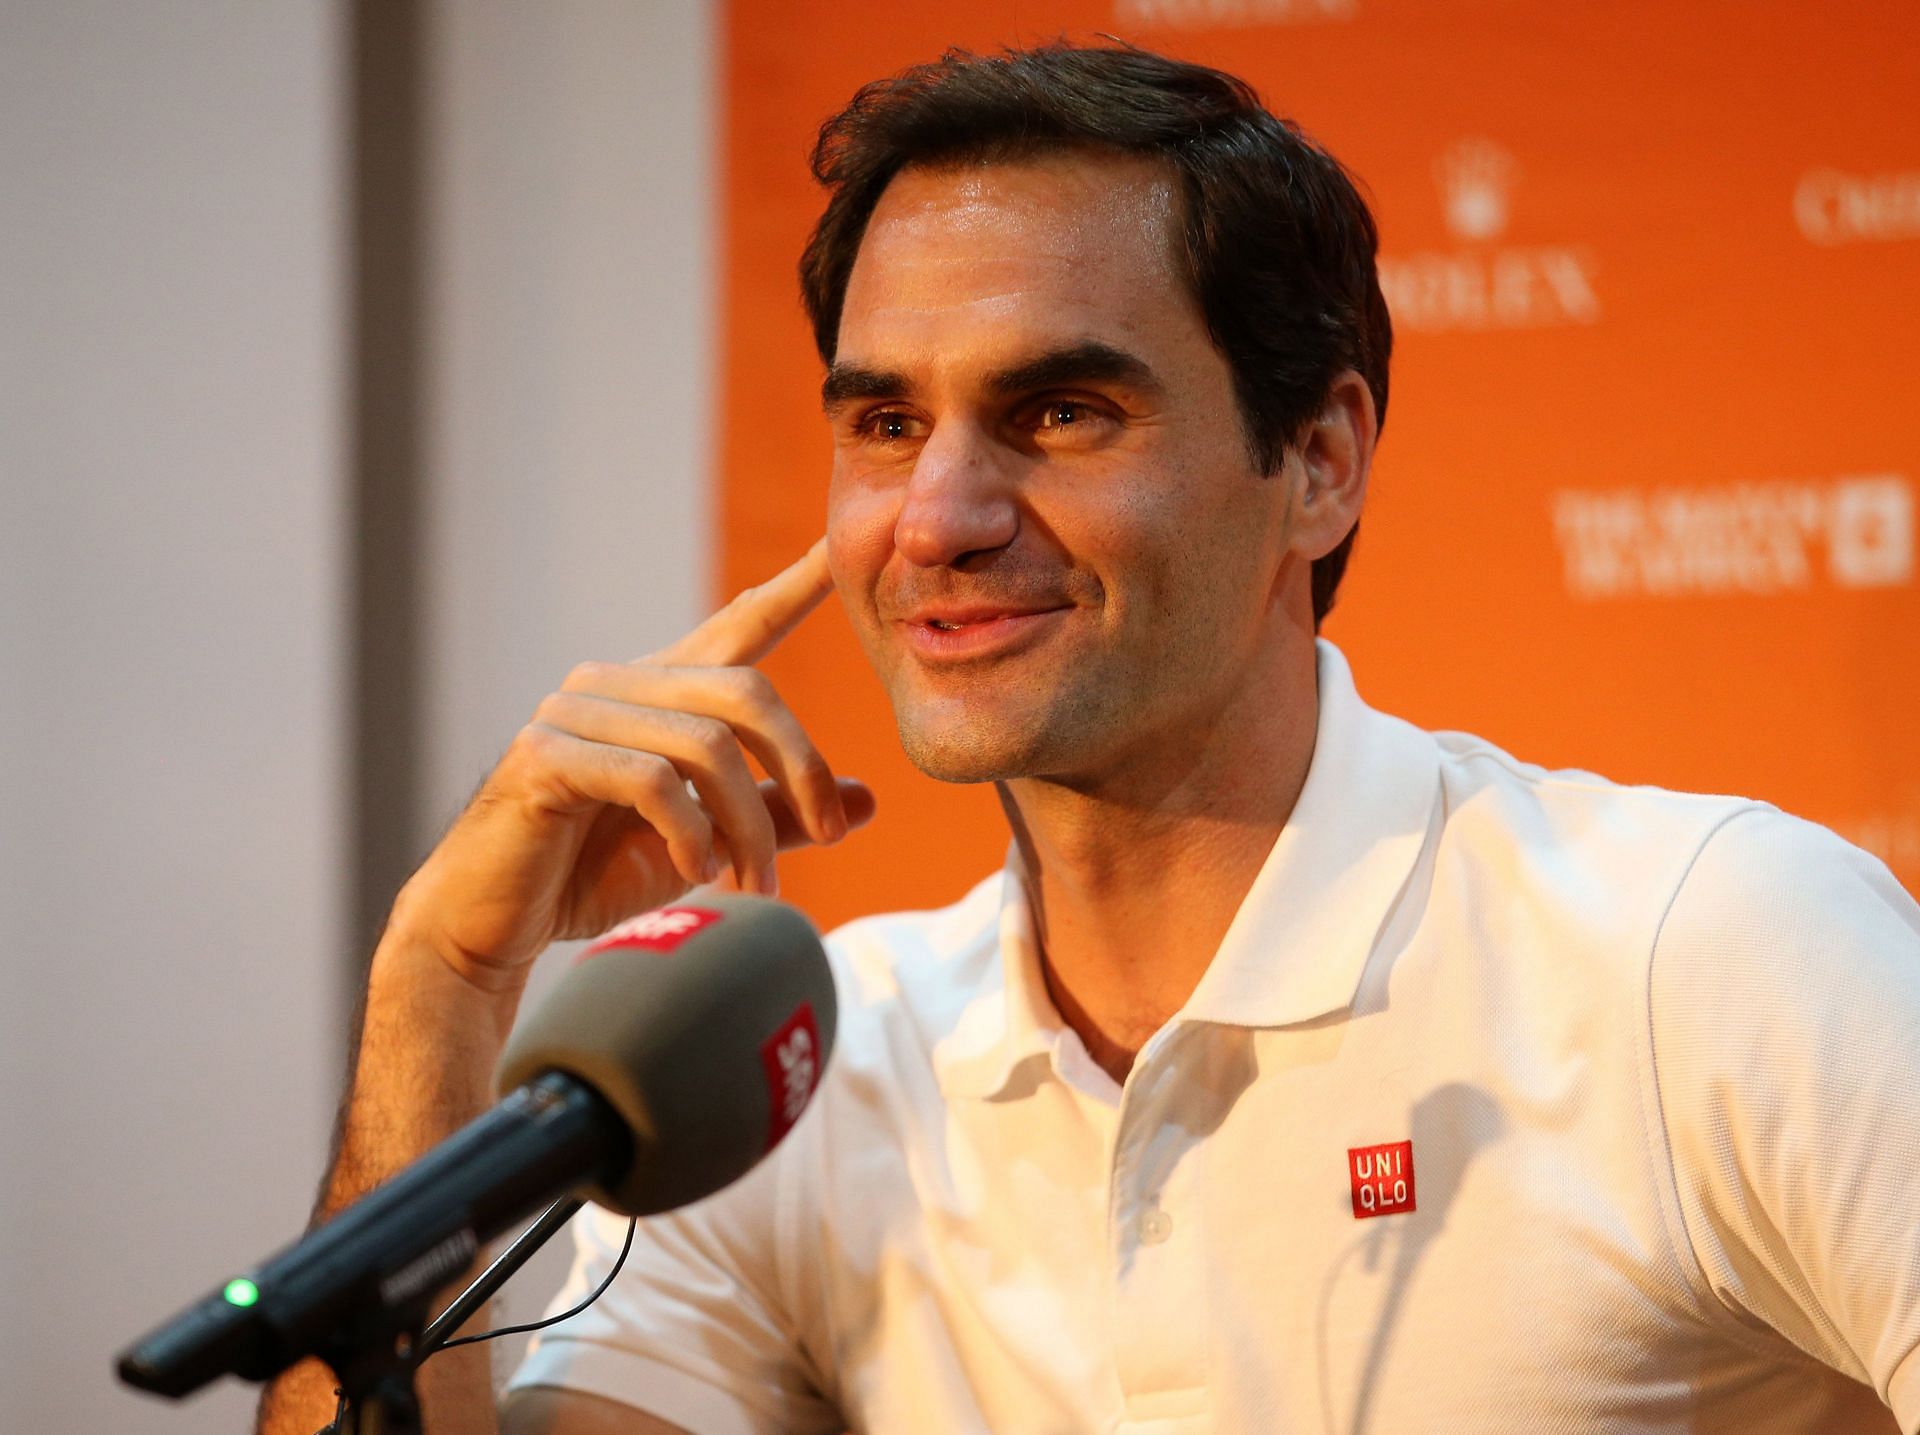 The Match in Africa: Roger Federer Arrival Press Conference